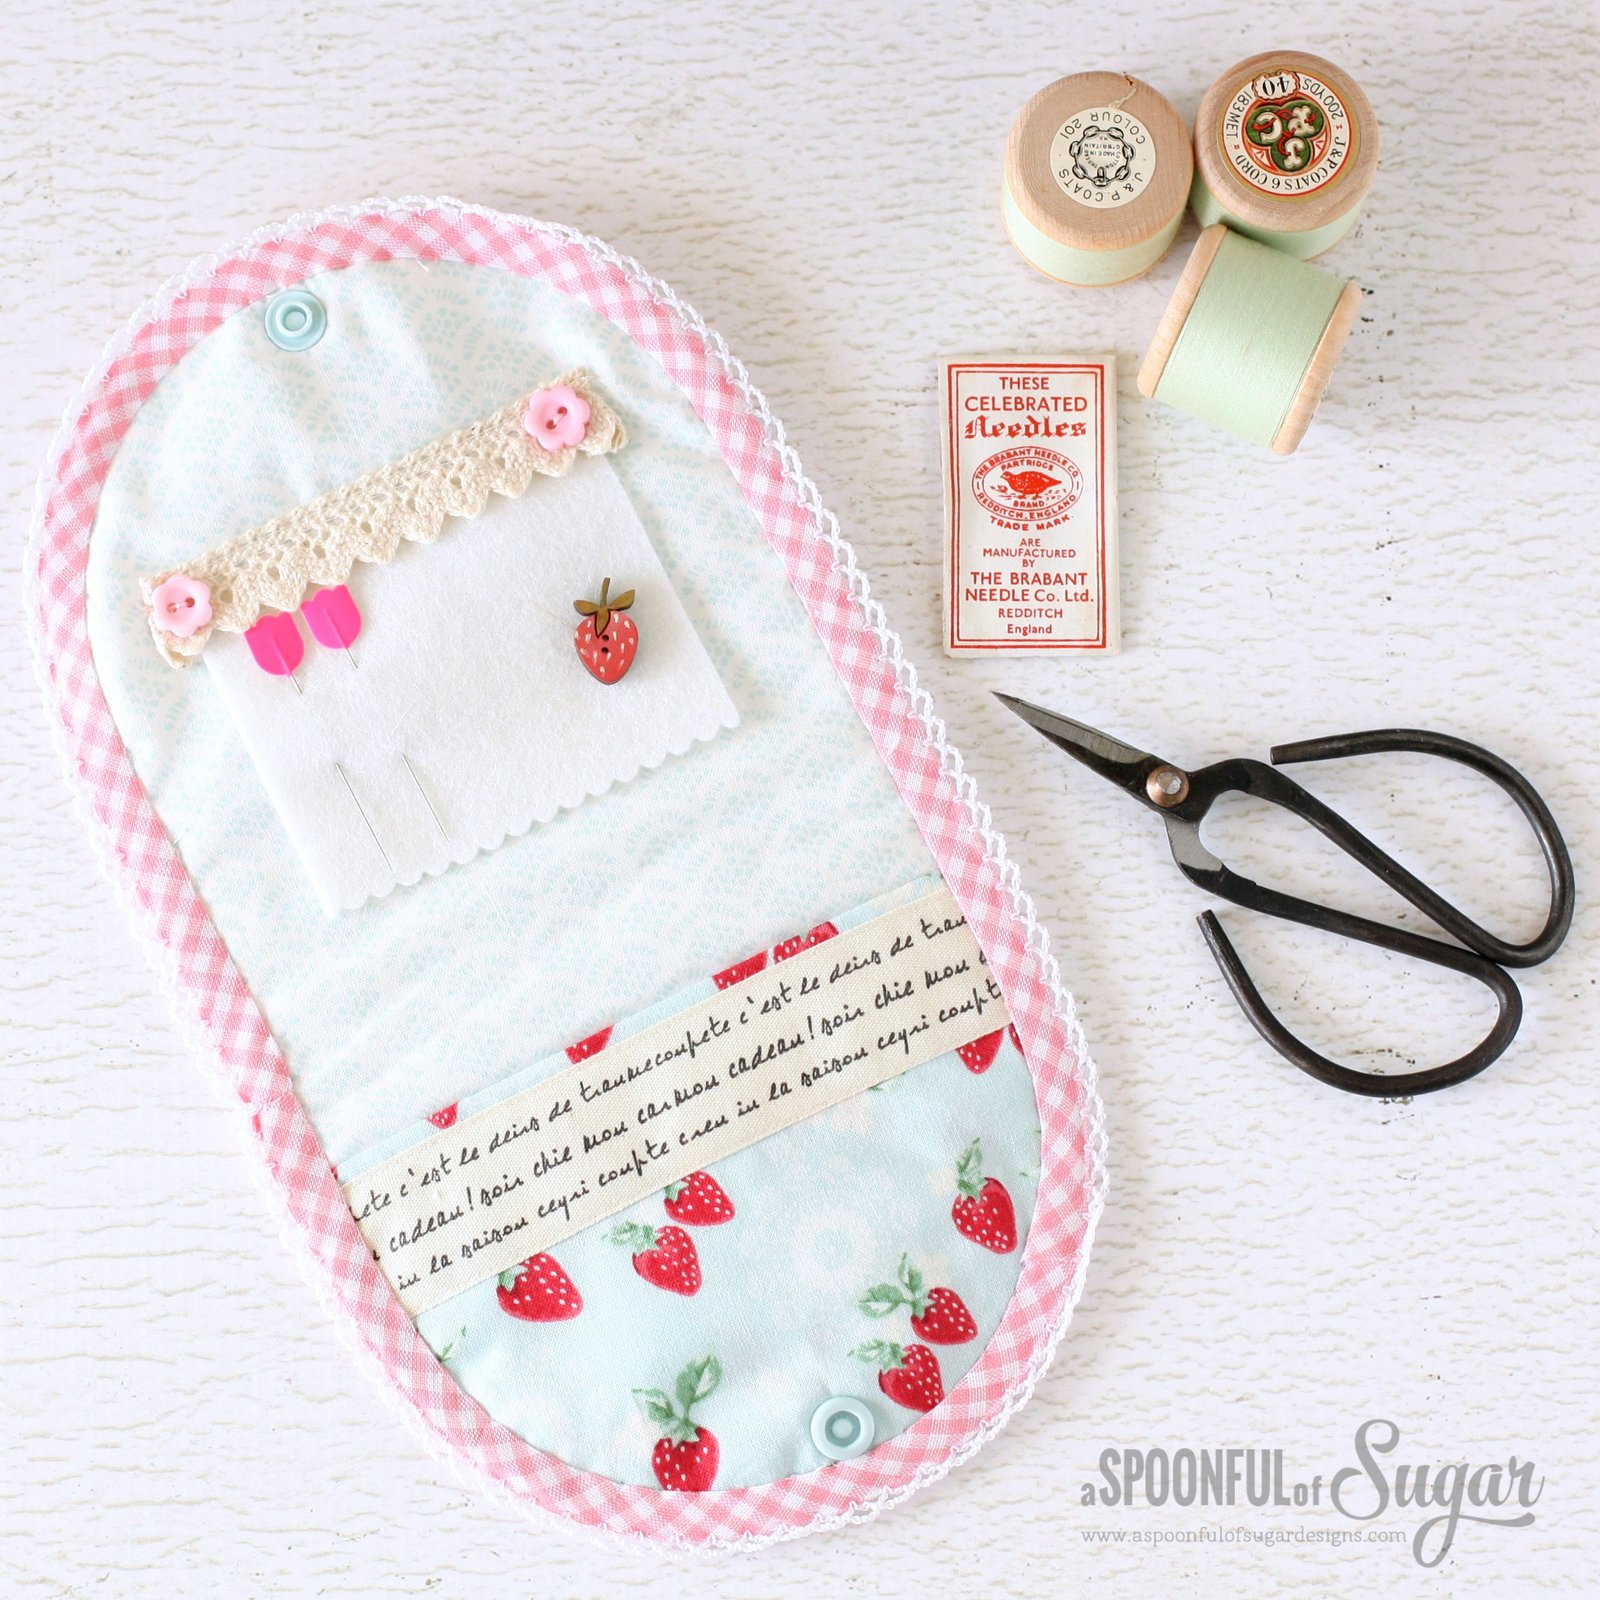 Hexie Sewing Kit Pattern by A Spoonful of Sugar , featuring High Tea Fabric